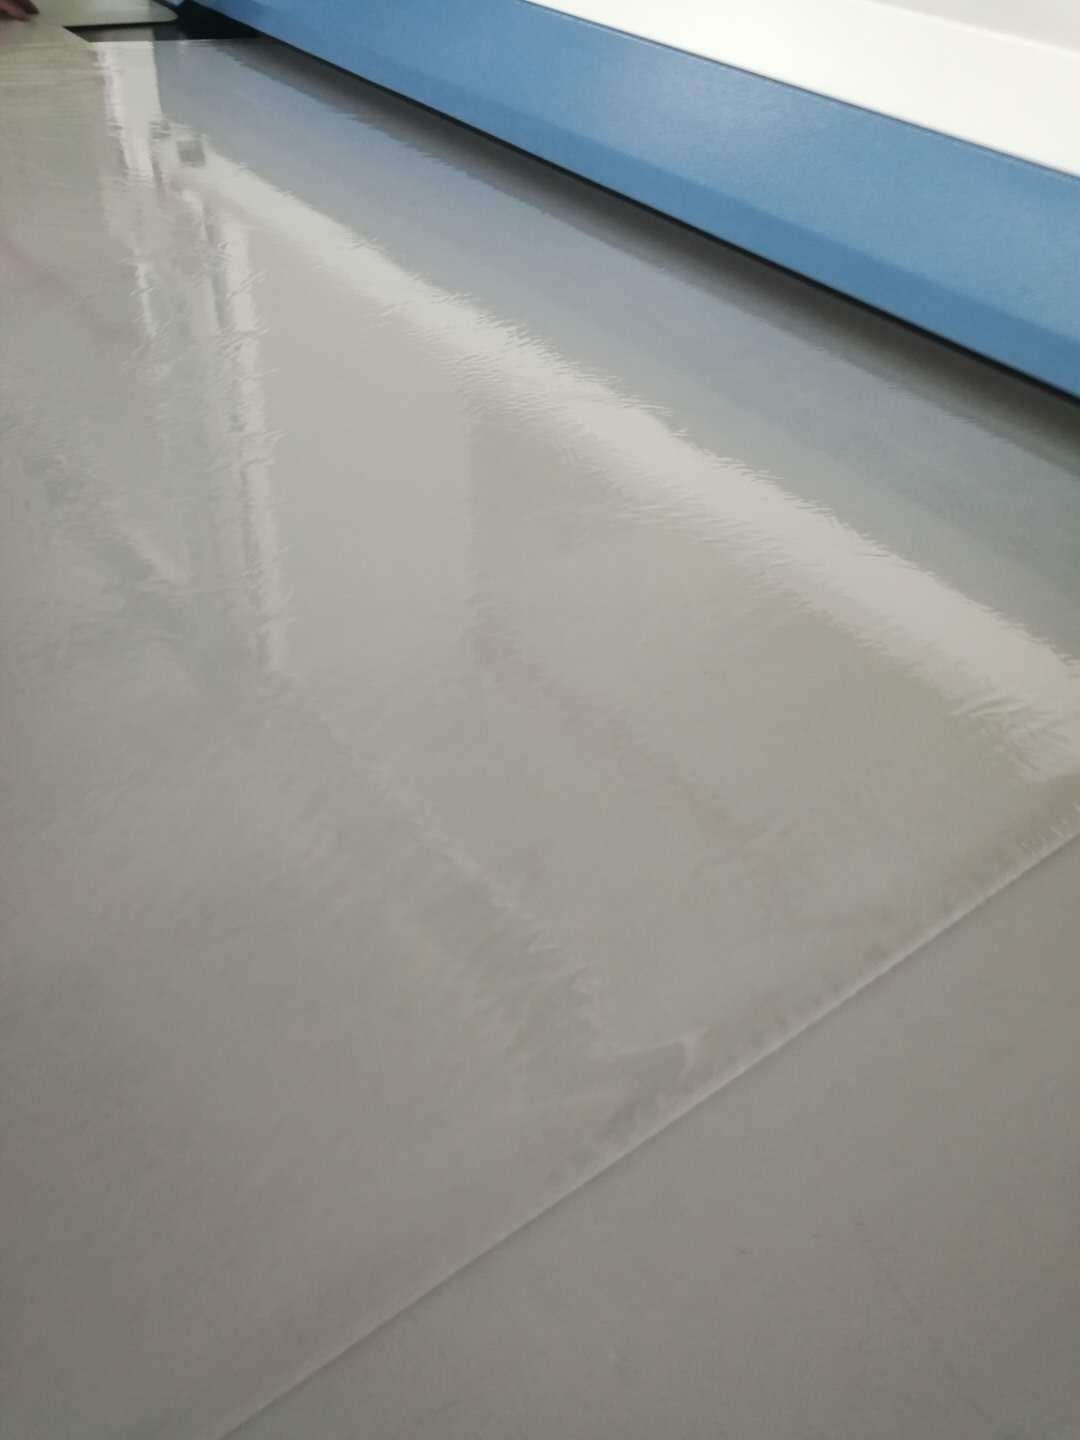 The temperature of the hot melt adhesive film is difficult to control and does not stick well?